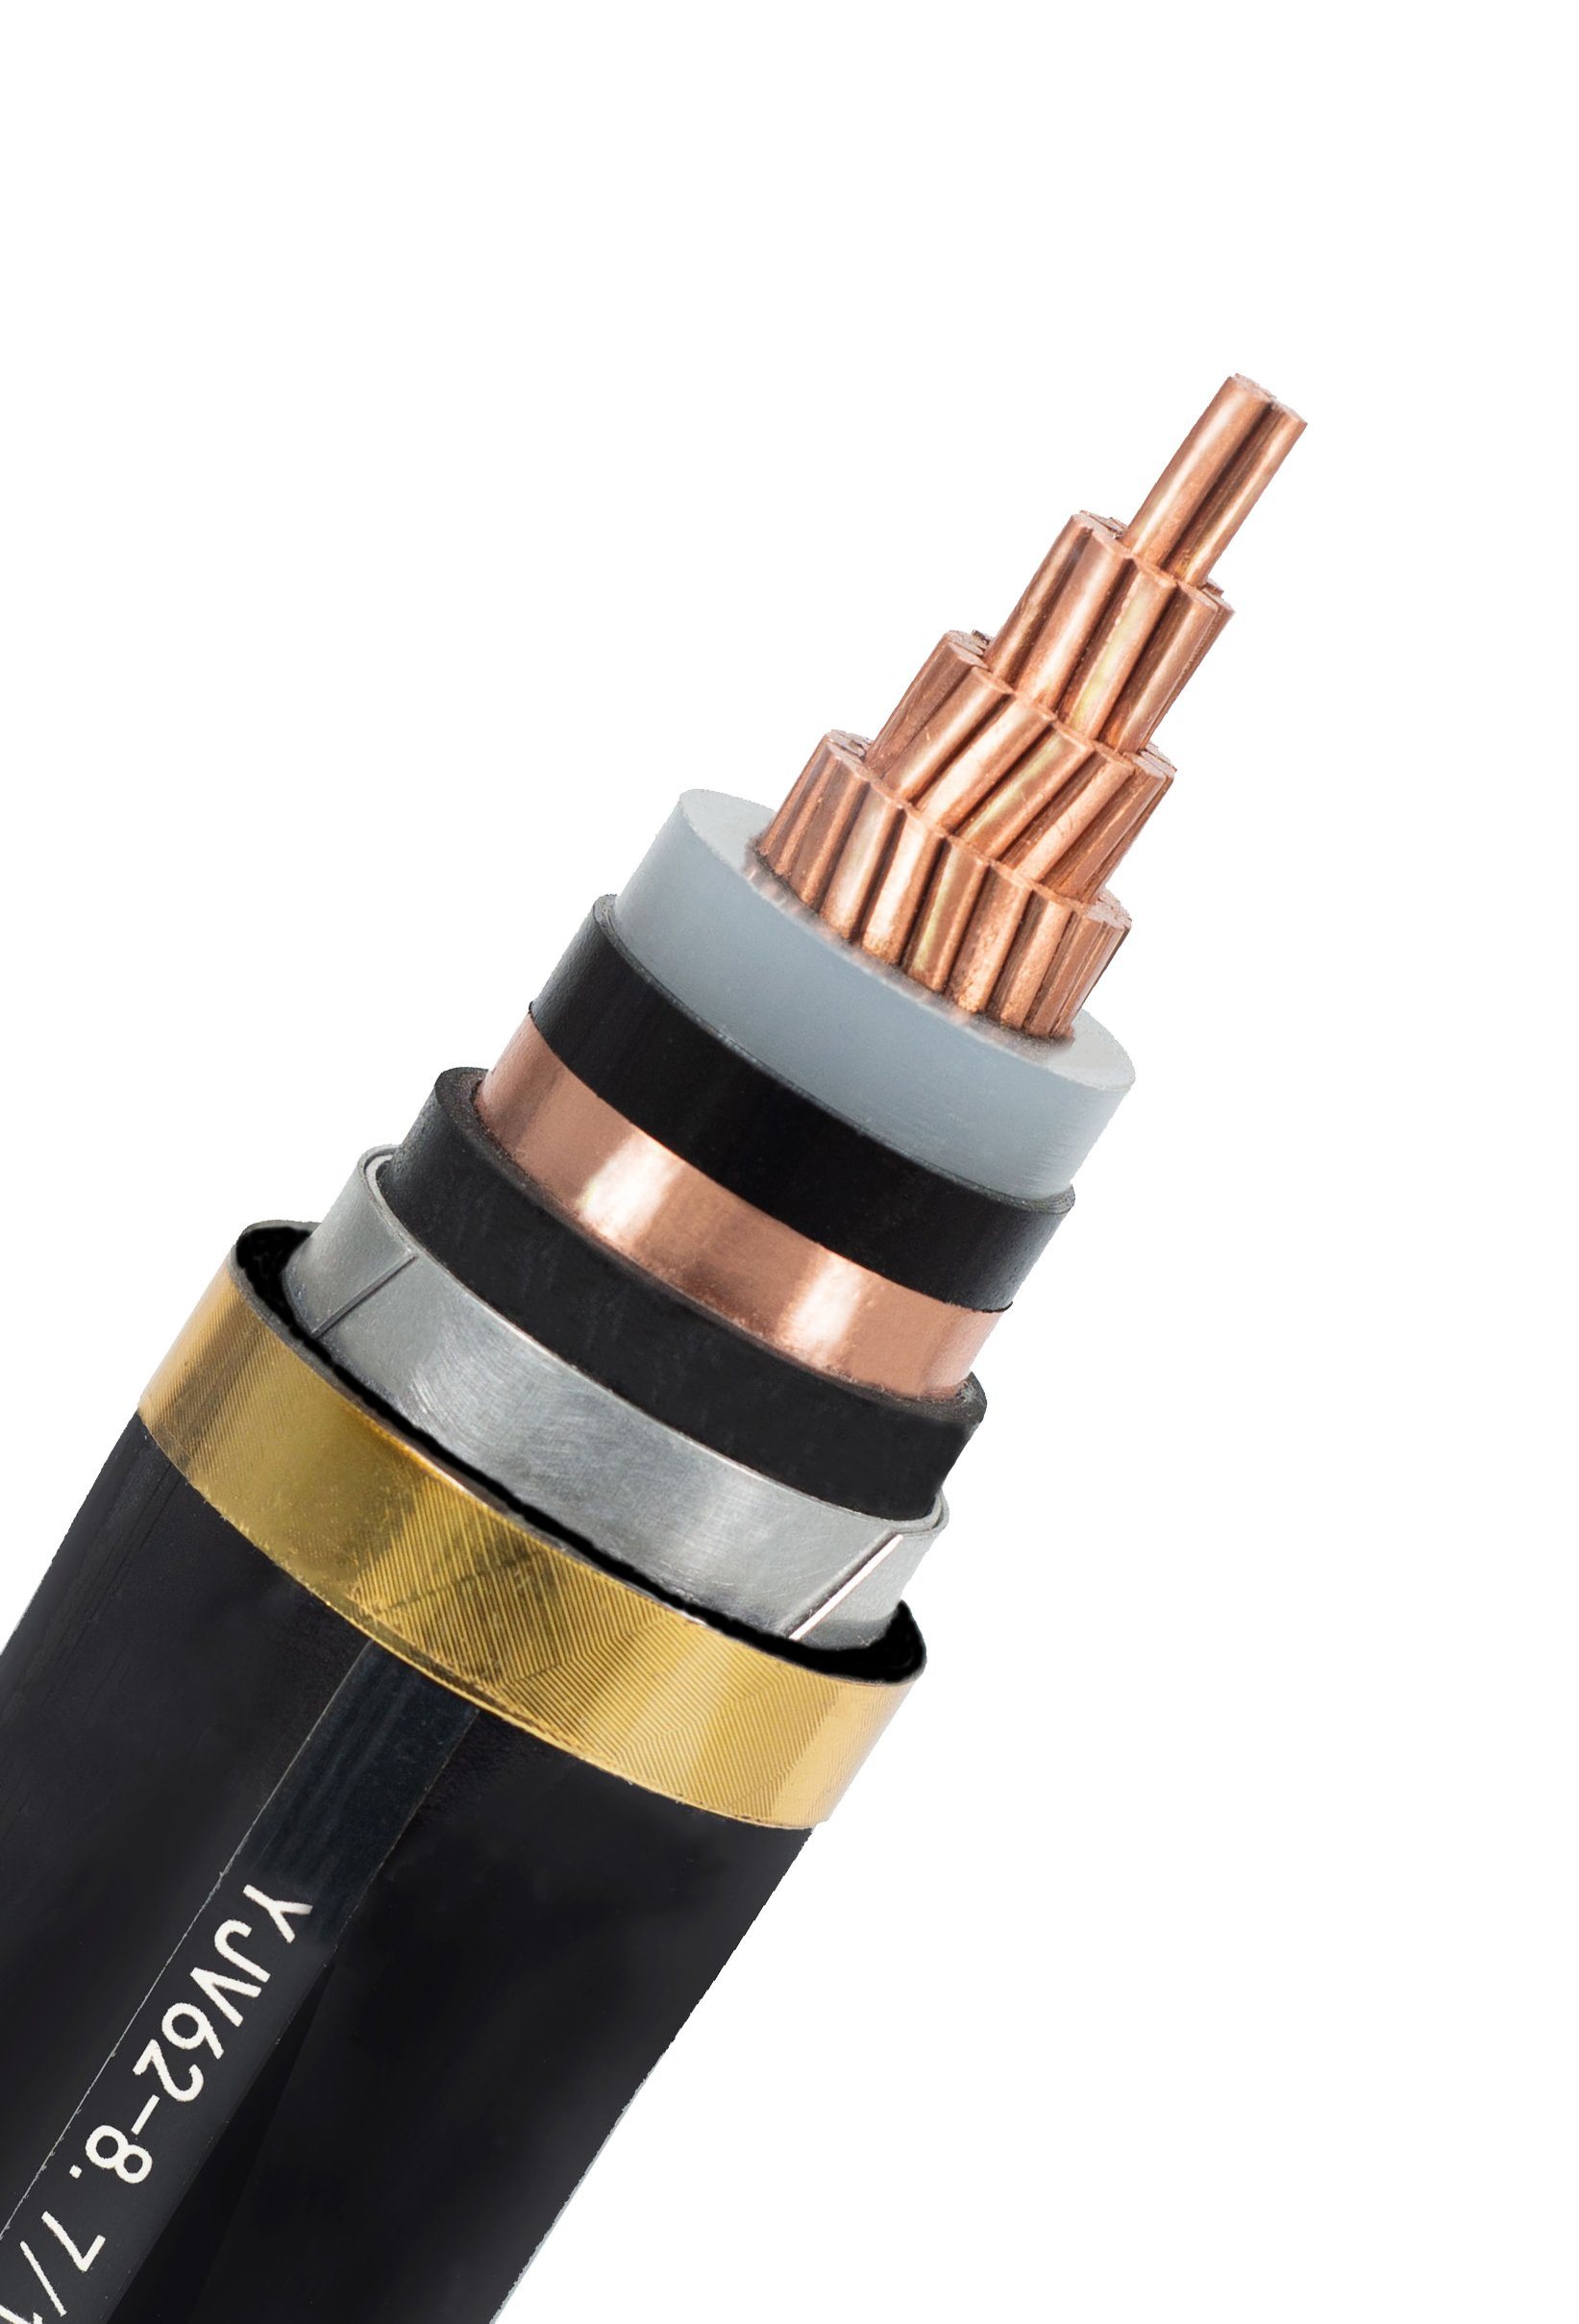 Low Voltage Underground Cable LV Cable XLPE Insulated Power Cable